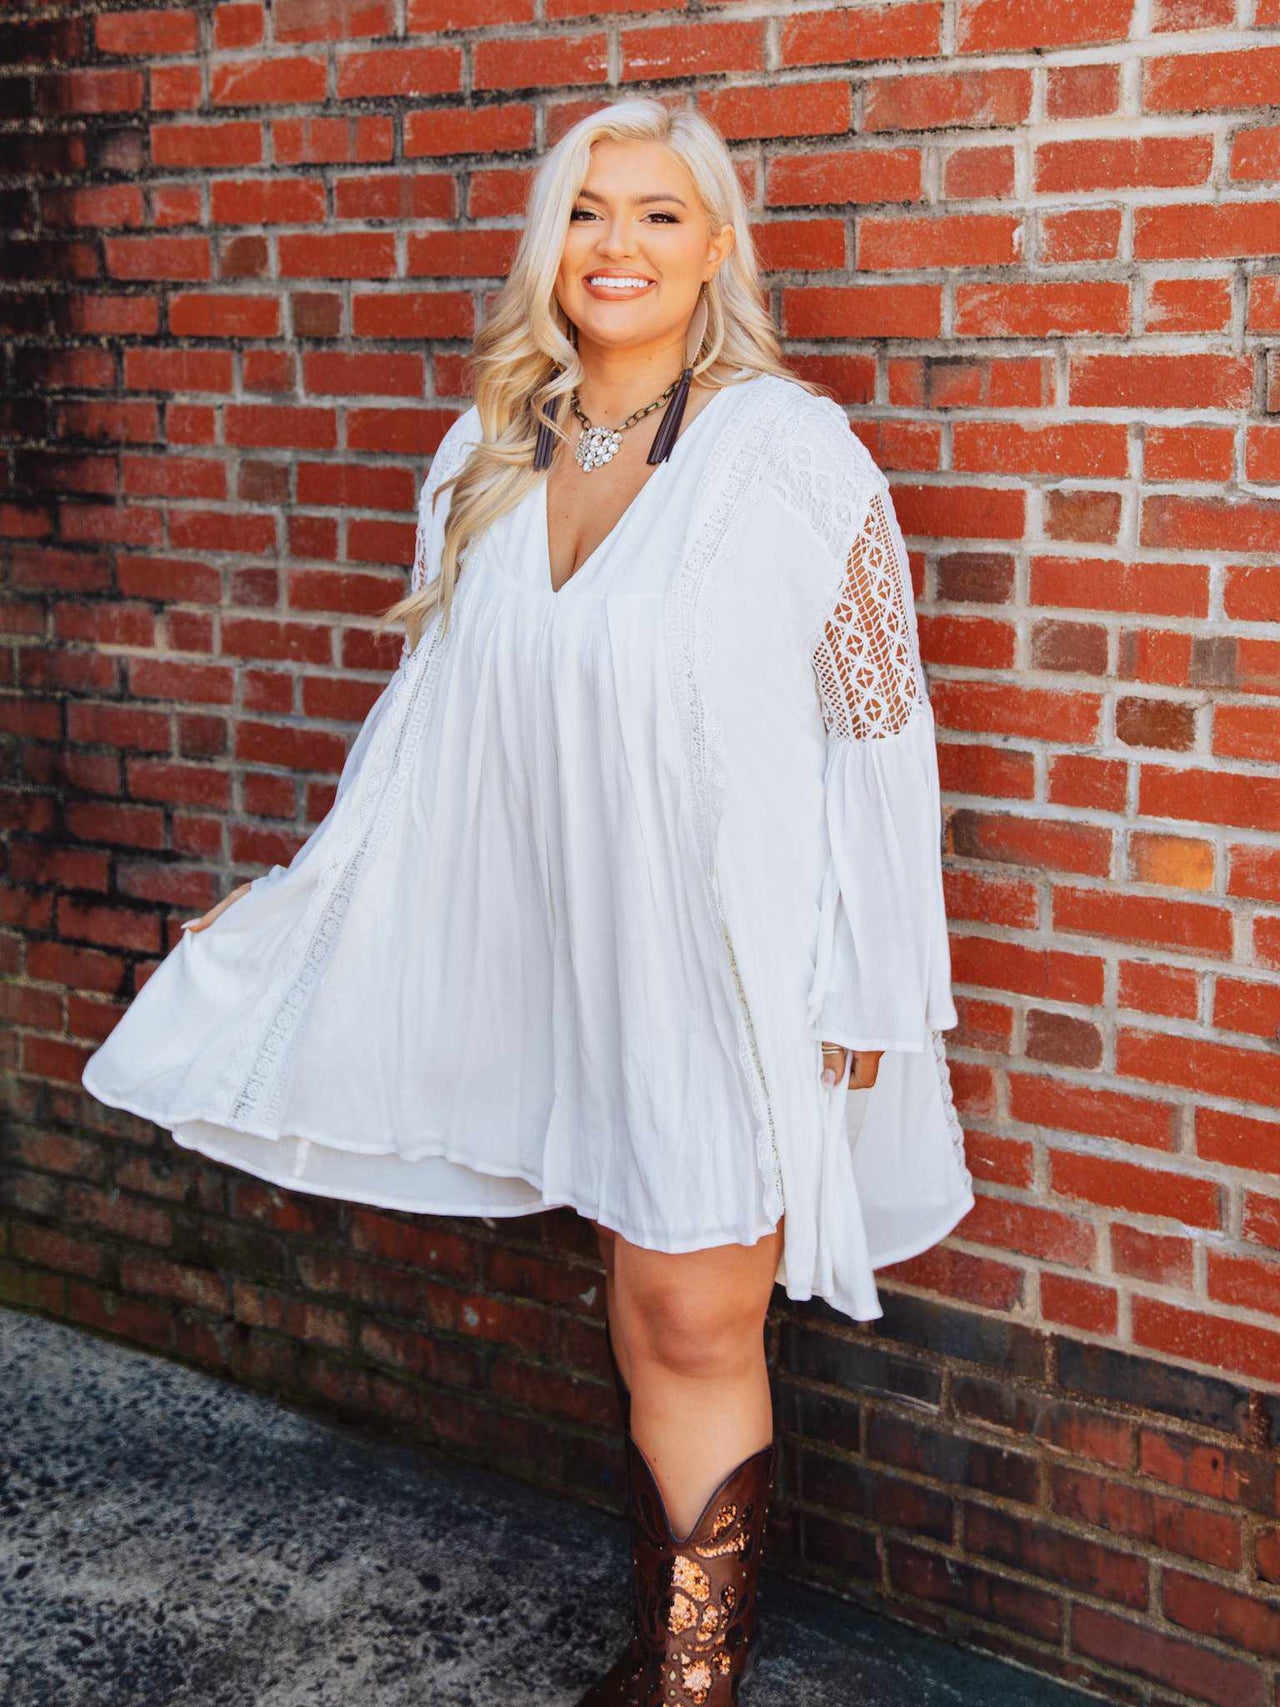 So Darling Dress - White-Dresses-Southern Fried Chics